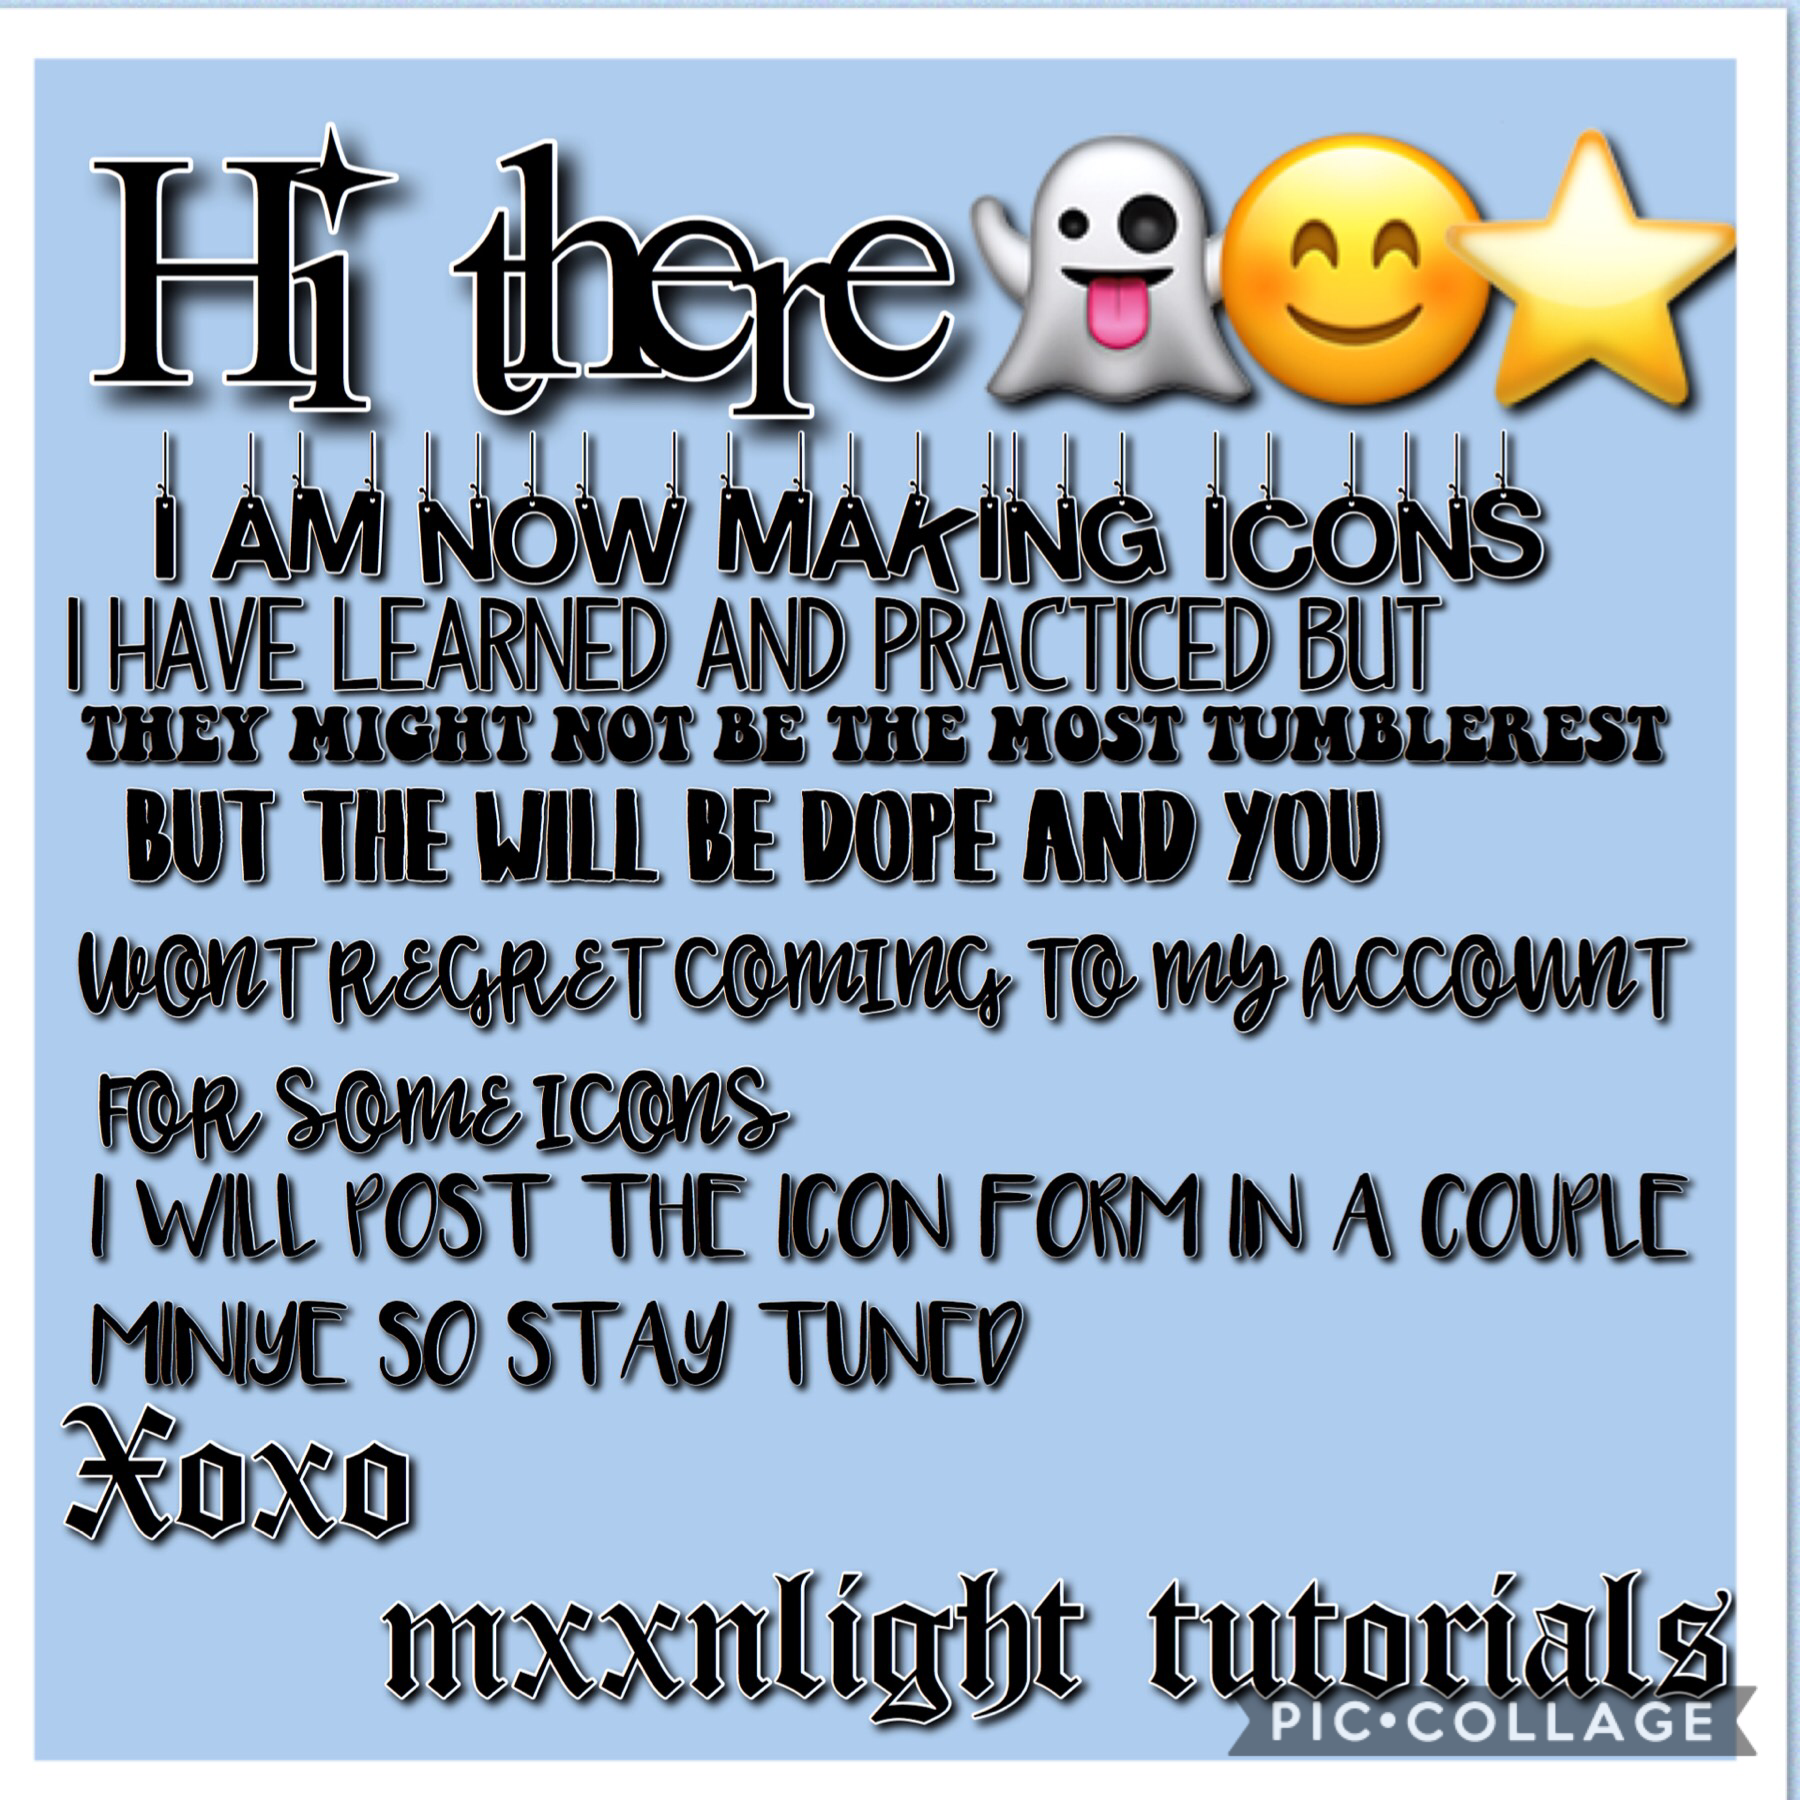 YEAH I’m so excited to be making icons now the icon form will be up shortly😆😆😆
     🌙mxxnlight tutorials 